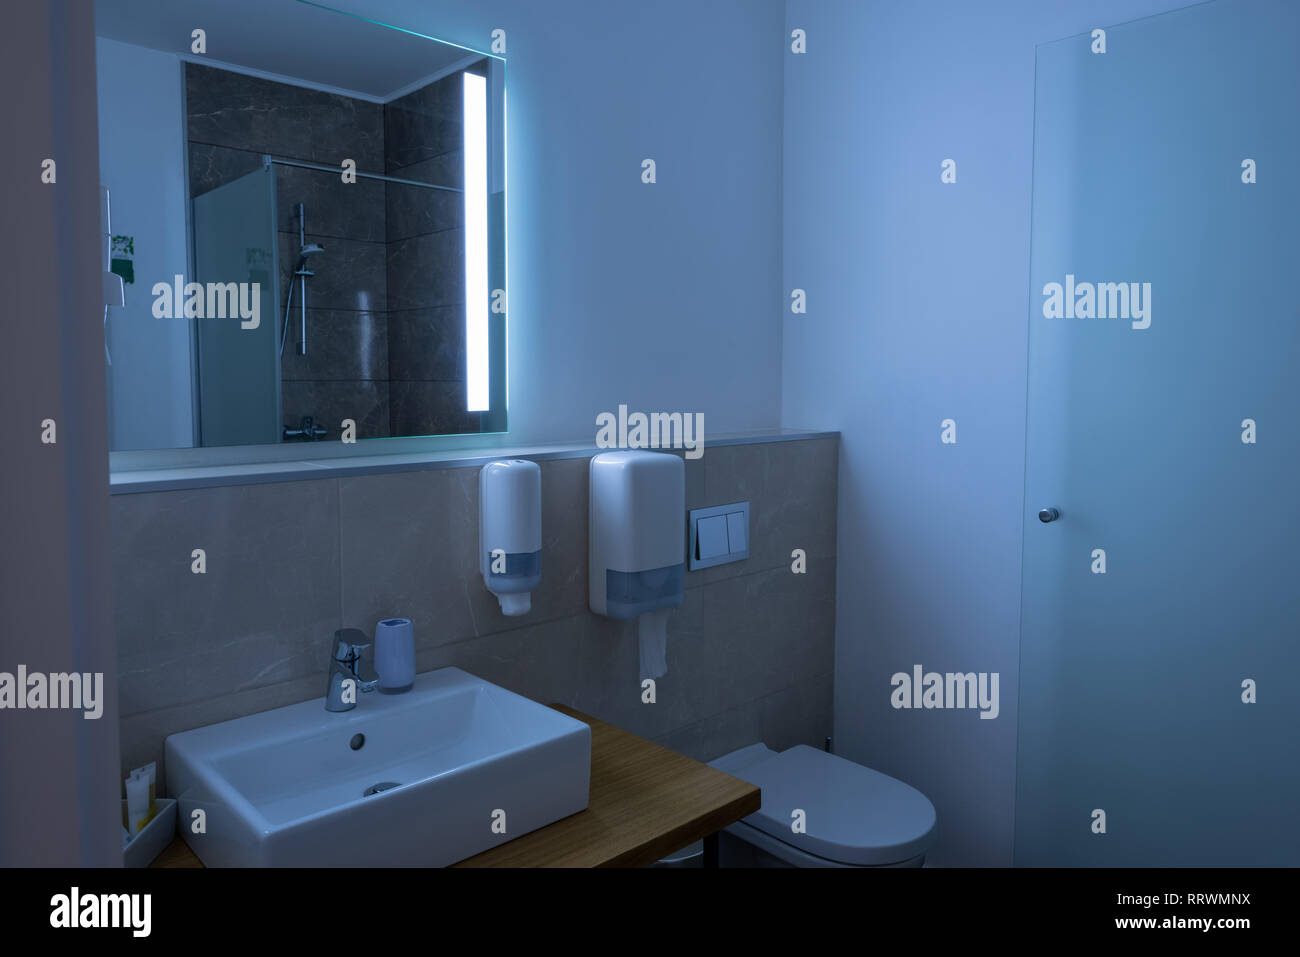 bathroom interior with sink, toilet, and mirror Stock Photo